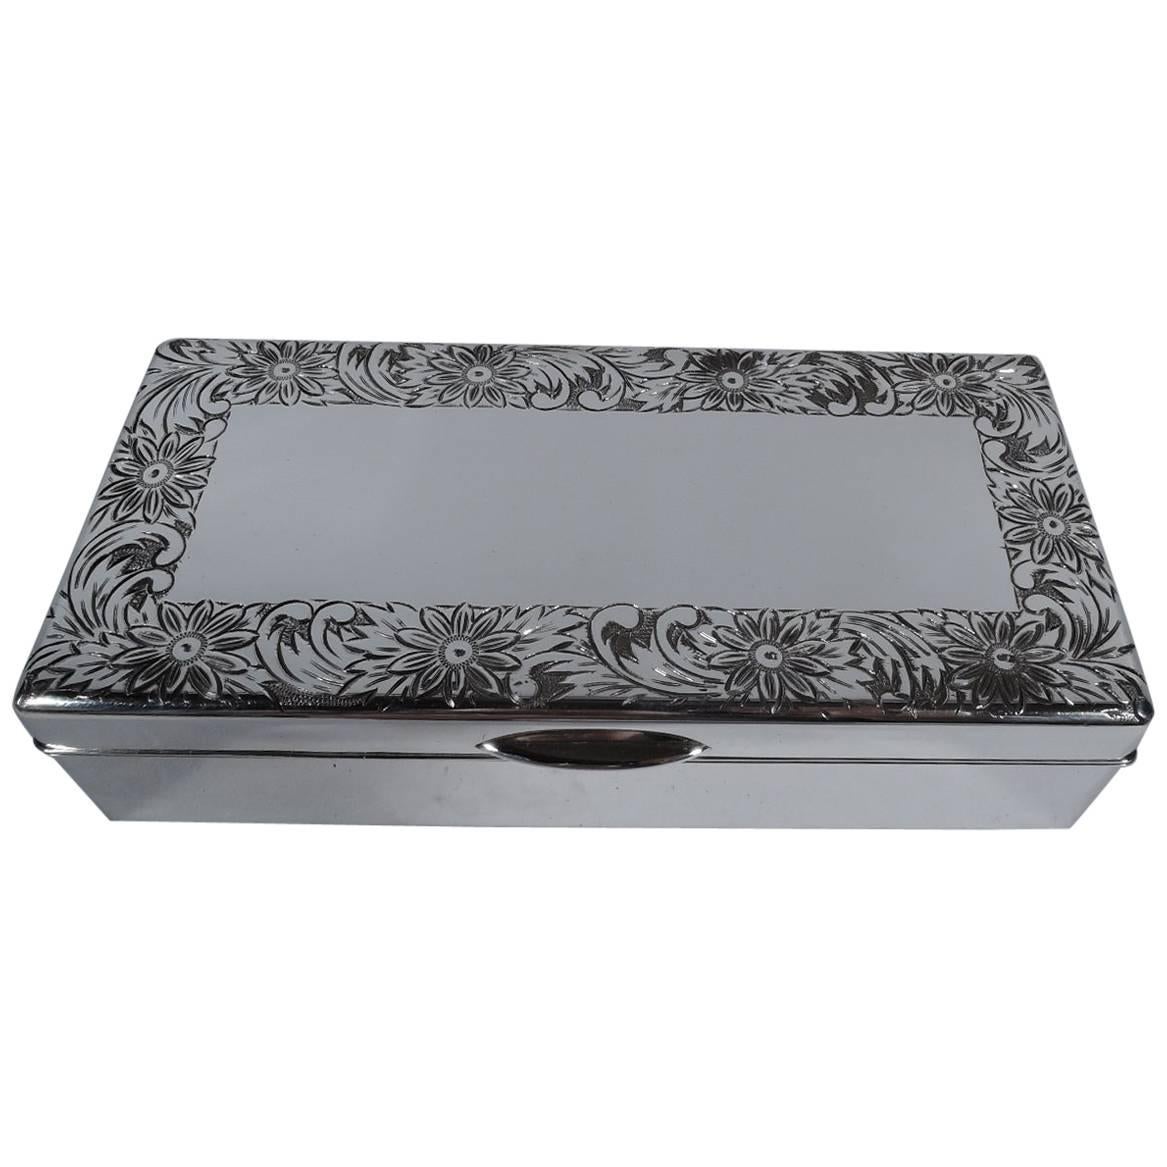 Lovely Sterling Silver Keepsake Box with Engraved Flowers